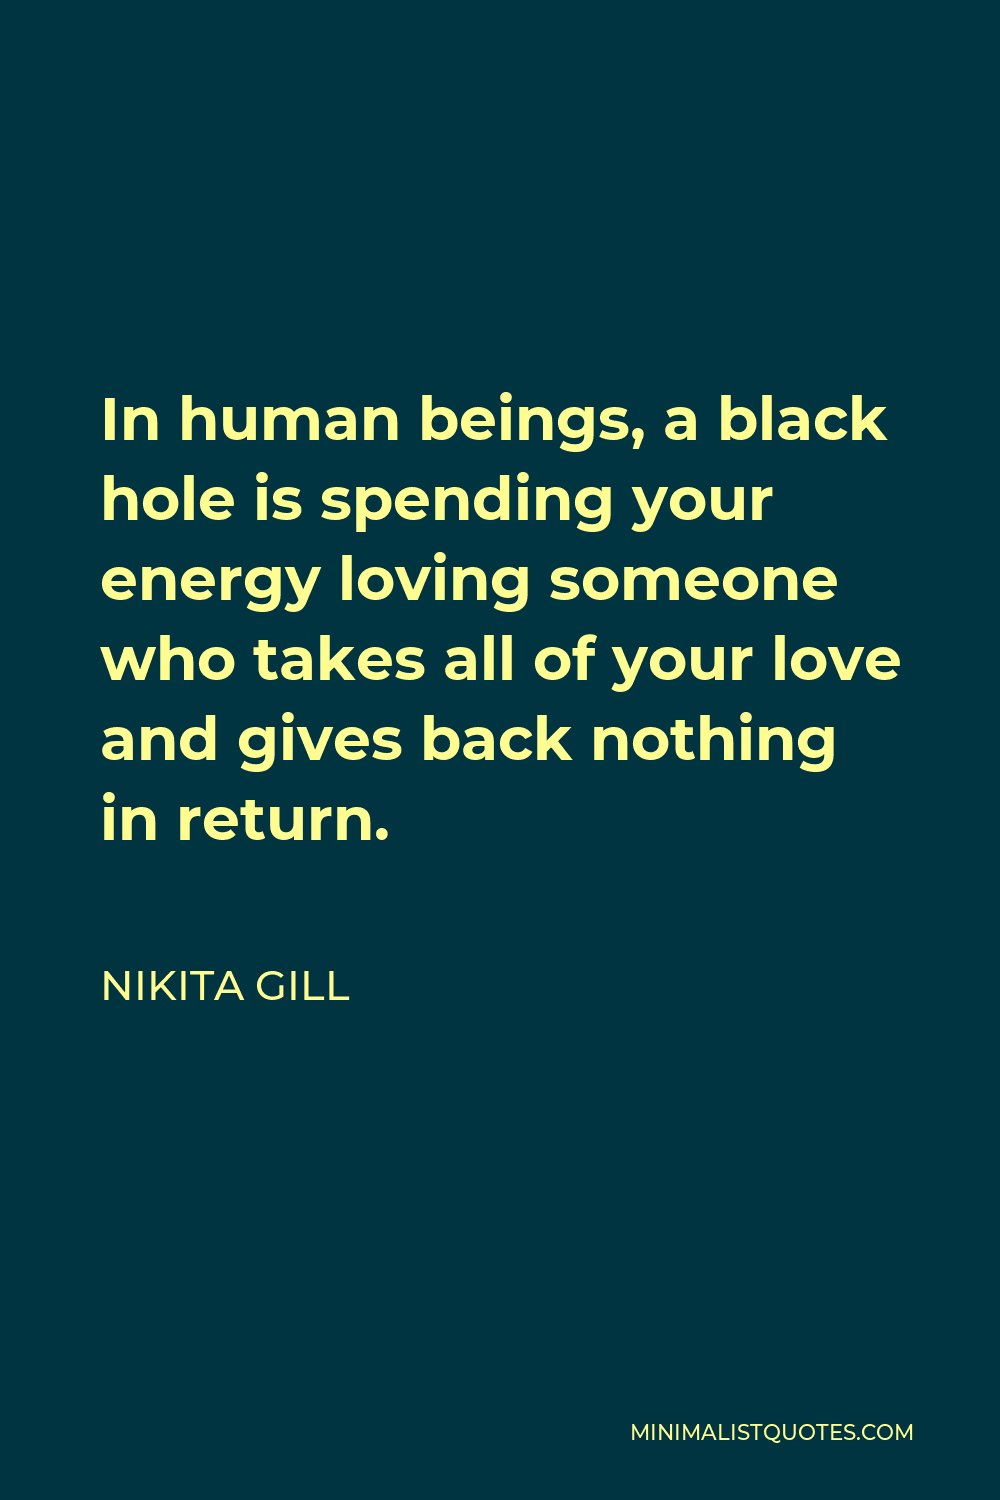 Nikita Gill Quote - In human beings, a black hole is spending your energy loving someone who takes all of your love and gives back nothing in return.